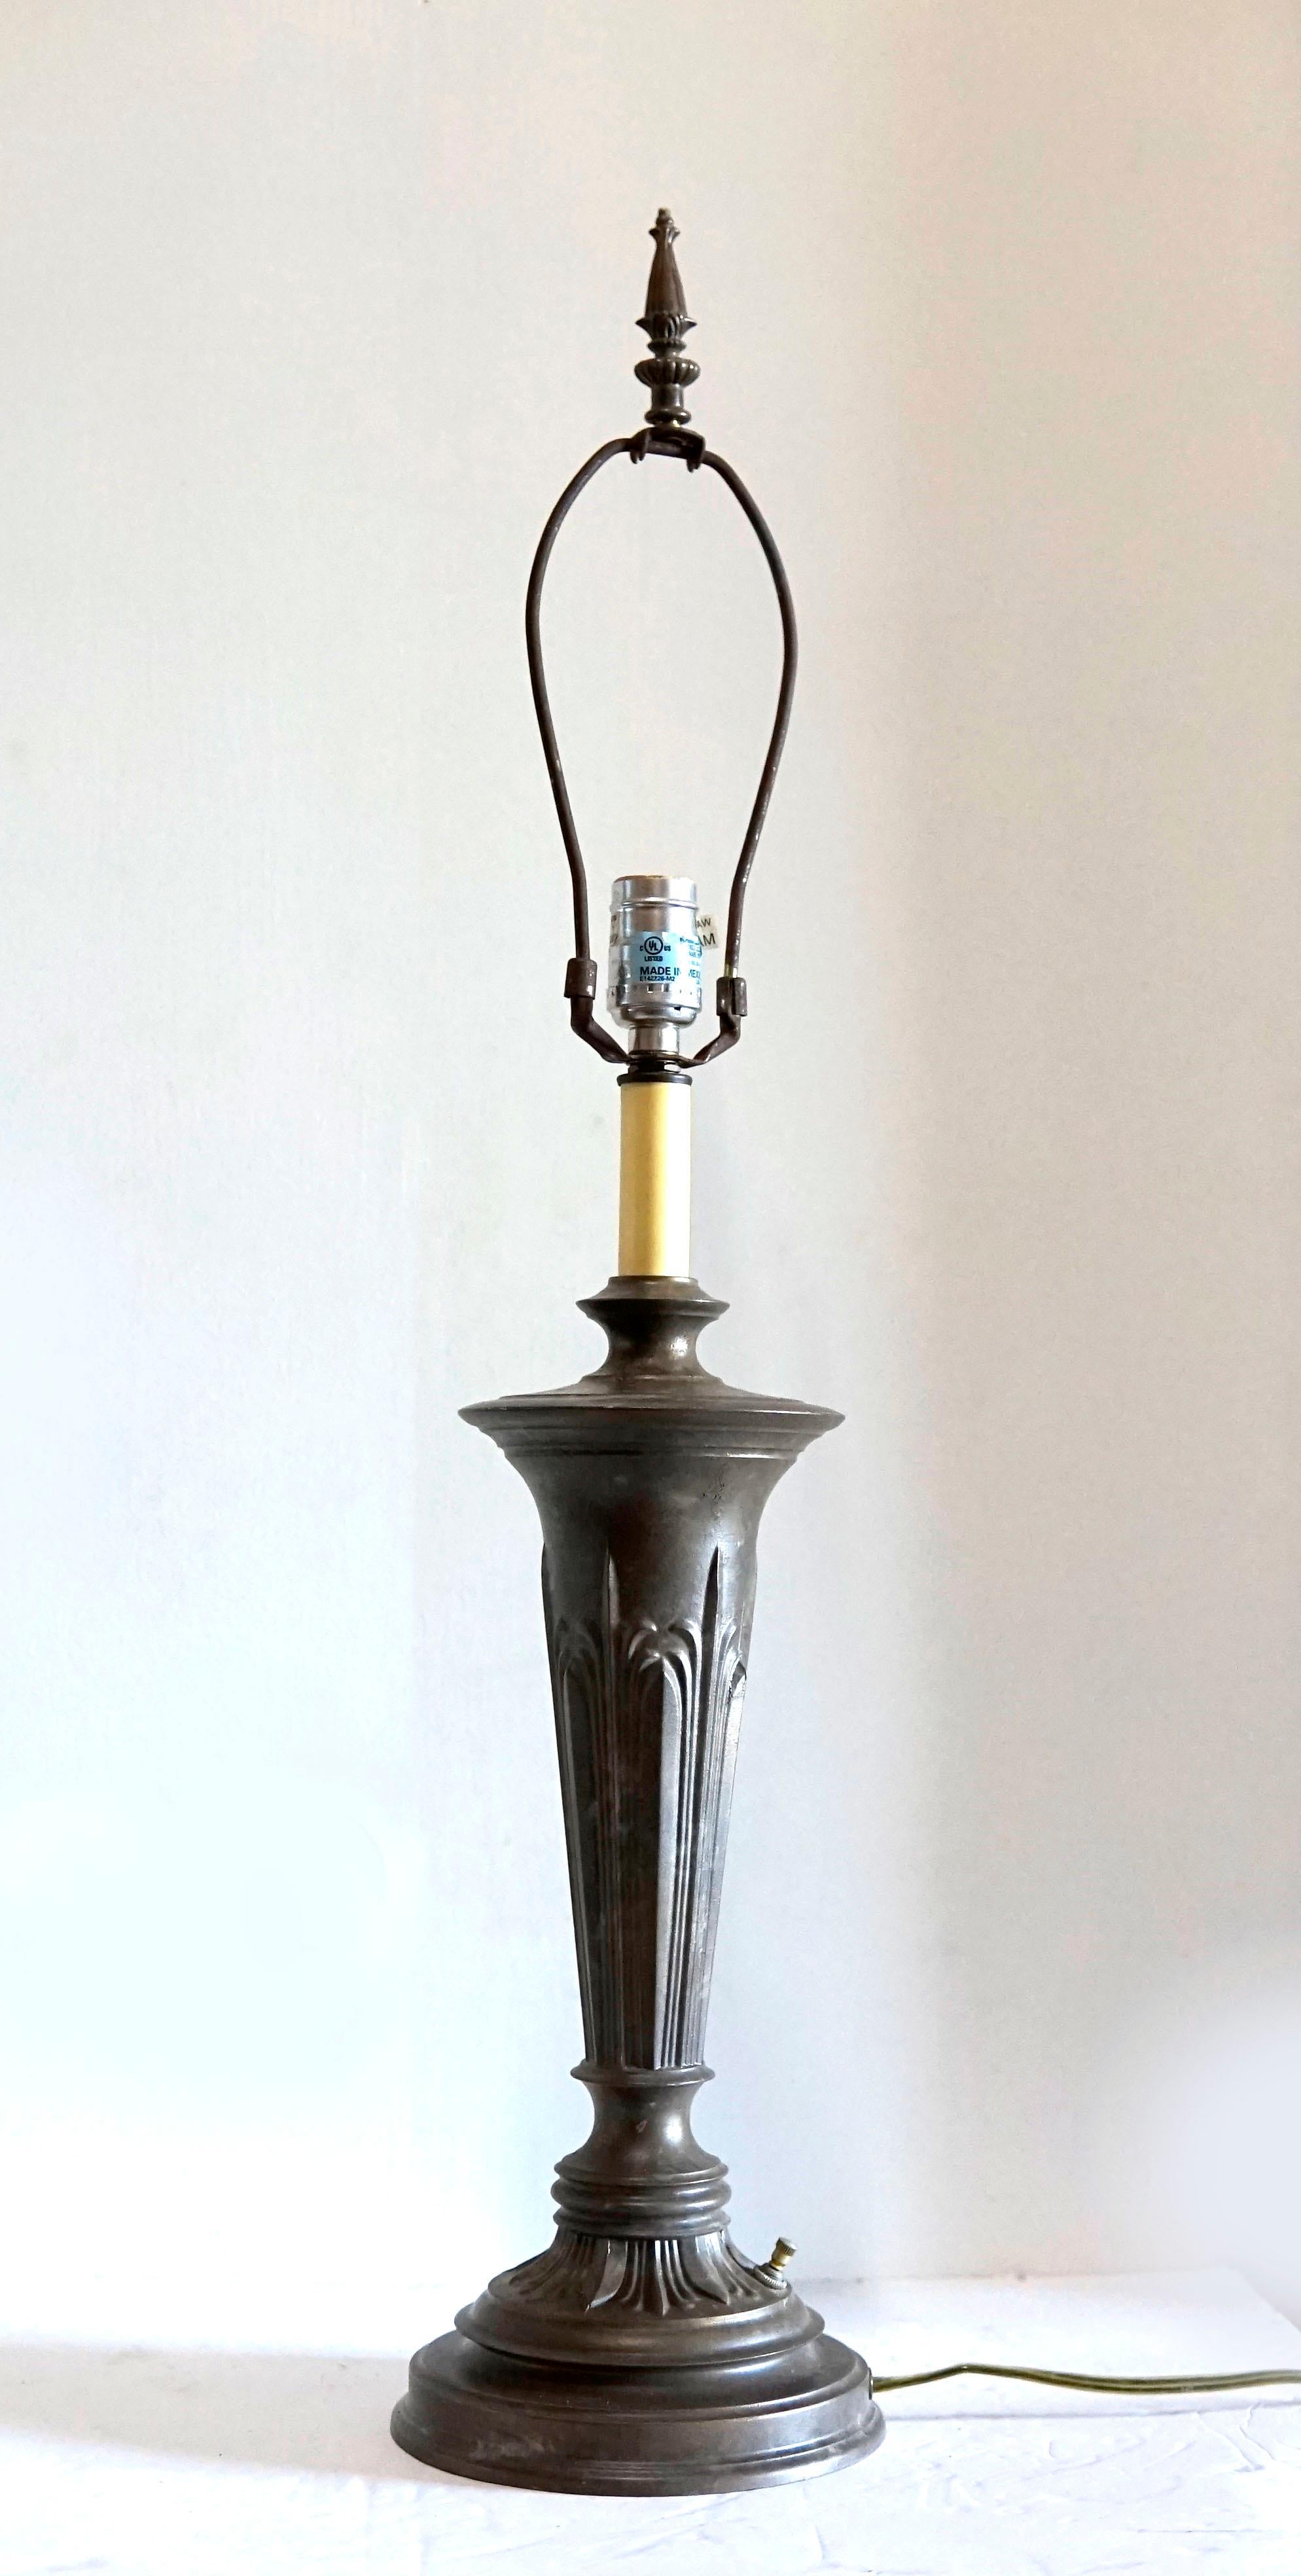 A beautiful patina has developed over the last century on this Neoclassical or Renaissance Revival.bronze table lamp. It is from the 1920s or 1930s and with the proper shade is the definition of statement lighting. It may be reminiscent of art deco,